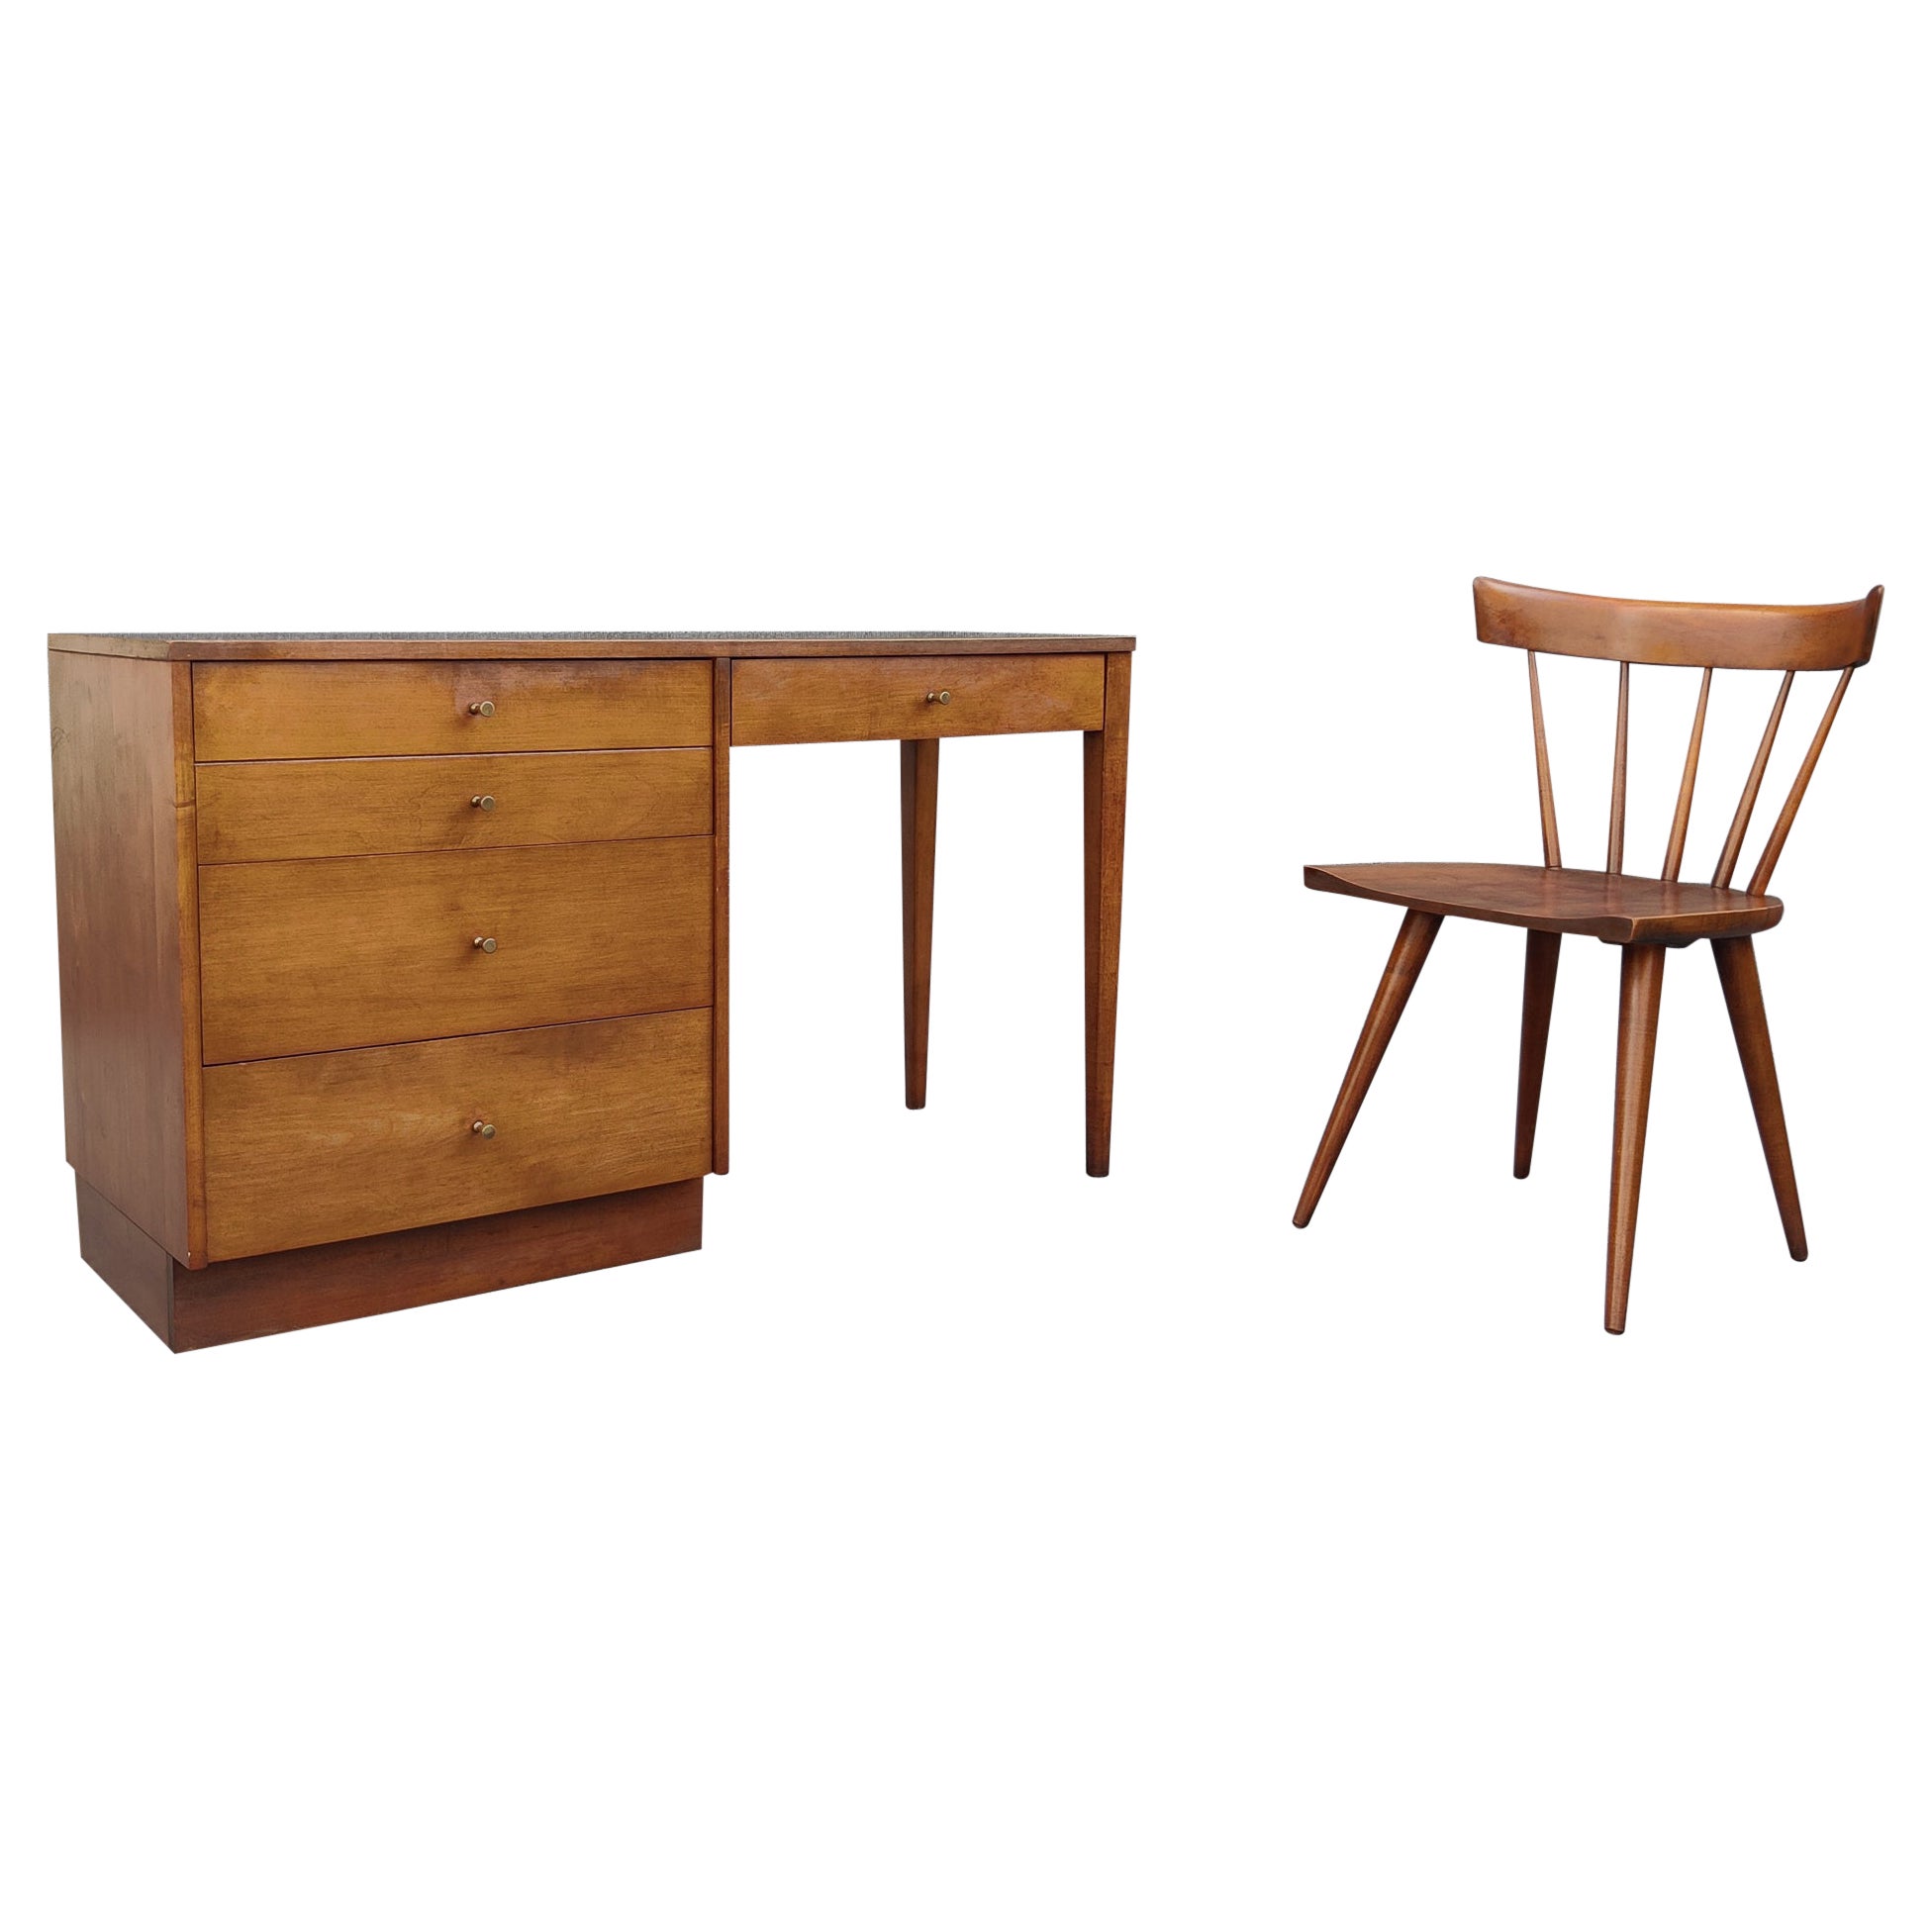 Paul McCobb for Winchendon Walnut Stain Maple #1560 Desk & Spindle Chair  For Sale